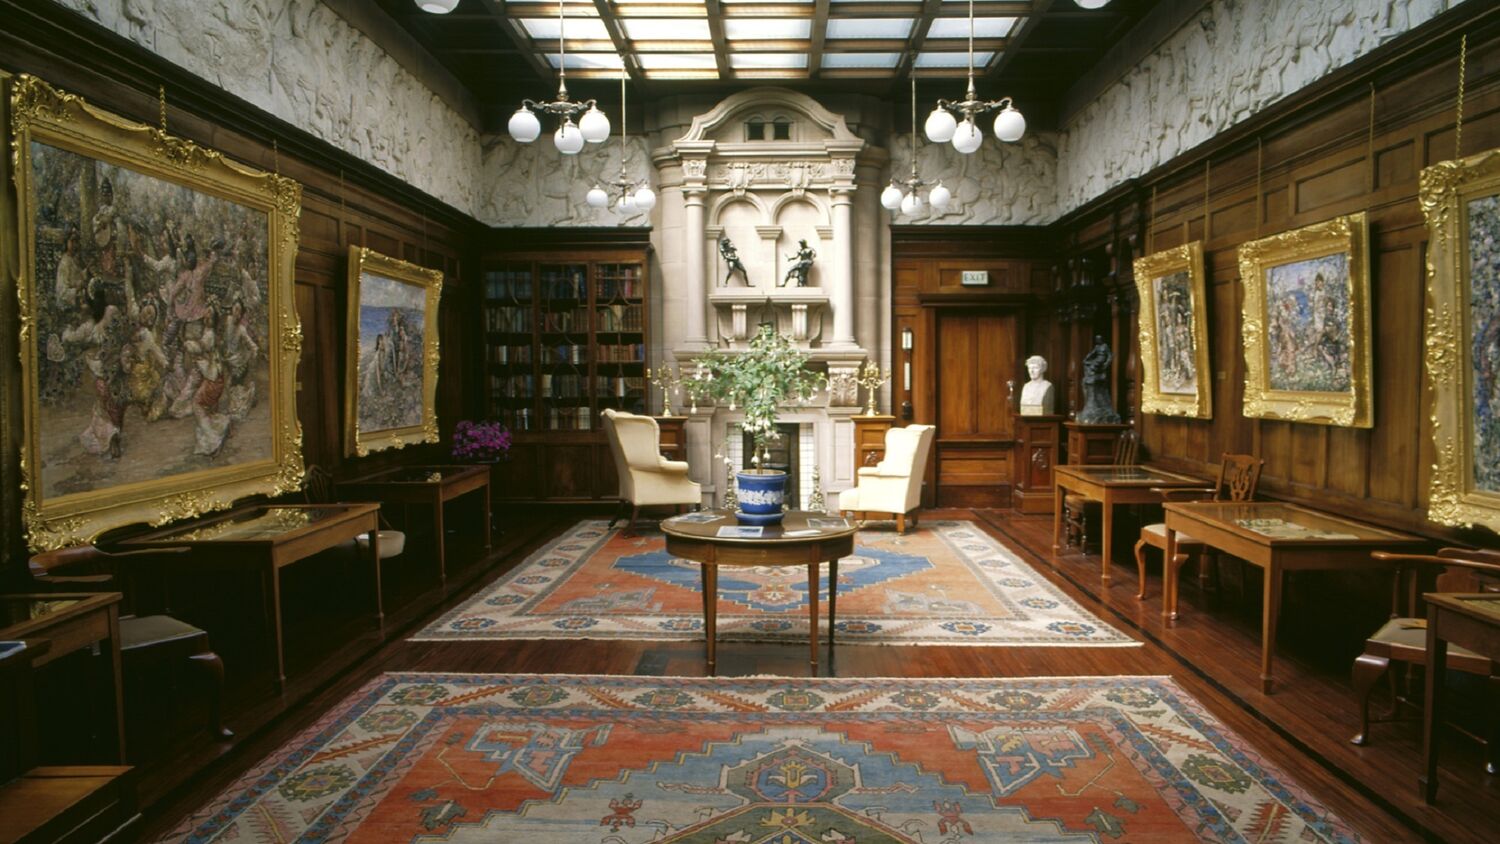 A view of a grand gallery room, with wood-panelled walls and skylight panels all along the ceiling. Gilt-framed paintings hang on the walls. The floor is covered by two large Turkish rugs. There is a very grand marble fireplace at the far end of the room, with two easy chairs before it. A number of wooden tables, some with vases of flowers upon them, stand around the room, with one in the centre.